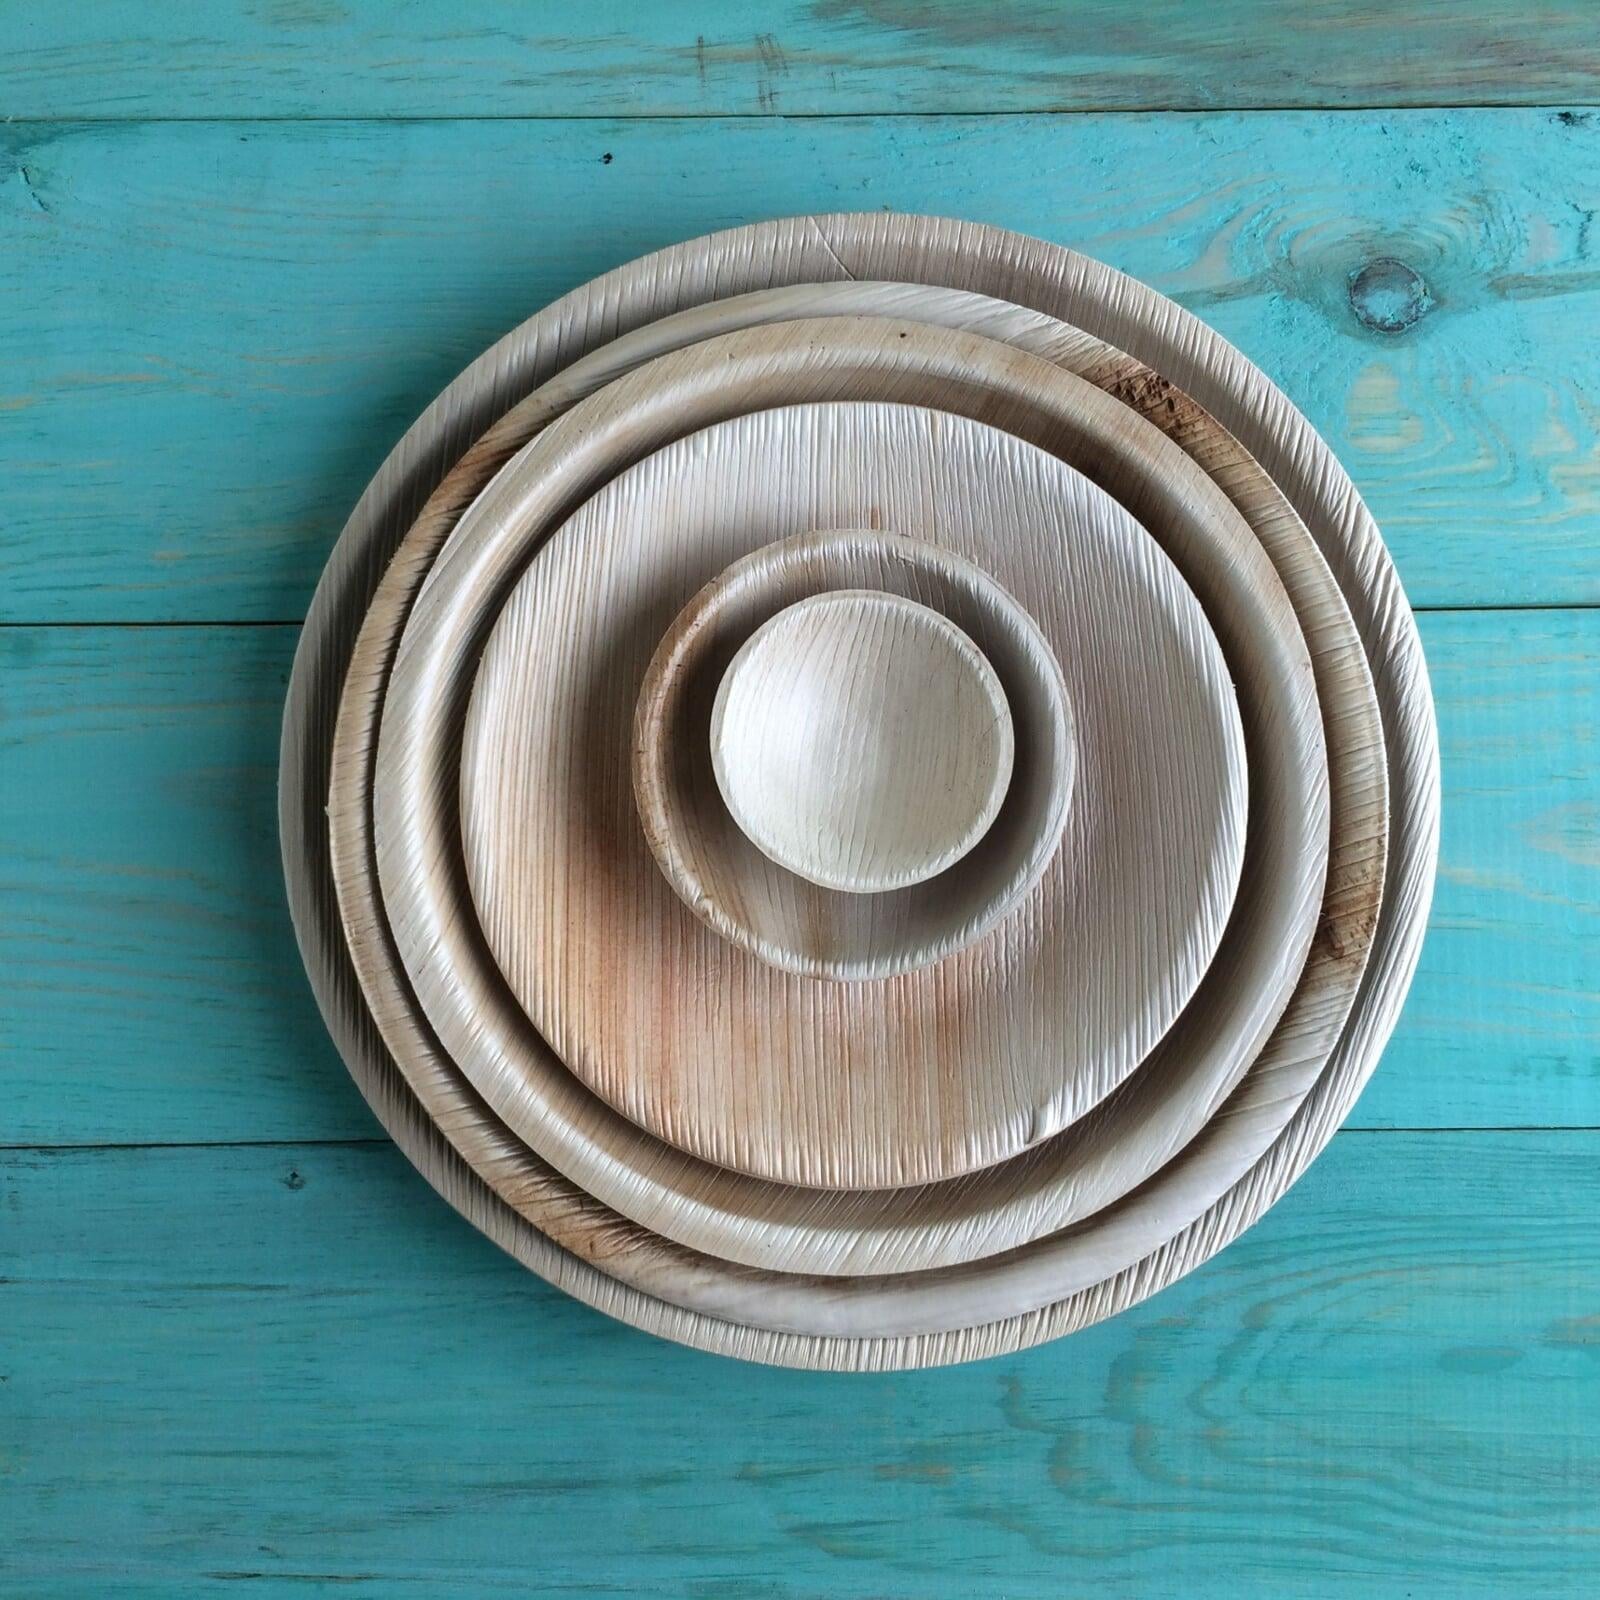 What does it take for an Adaaya areca palm leaf plate to decompose?